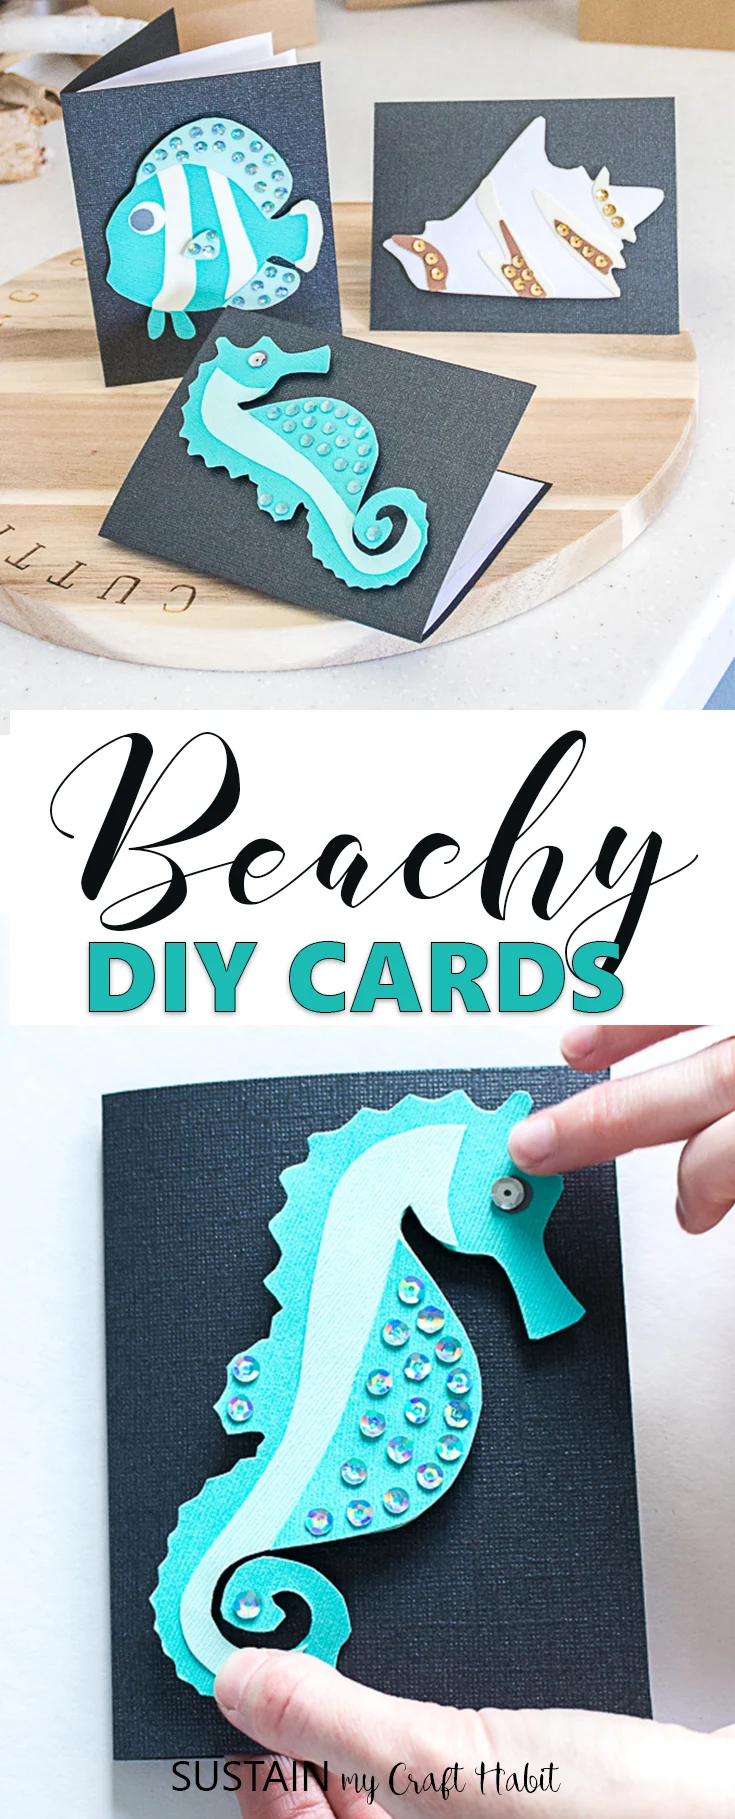 Adorable handmade beach-themed DIY cards perfect for any occasion